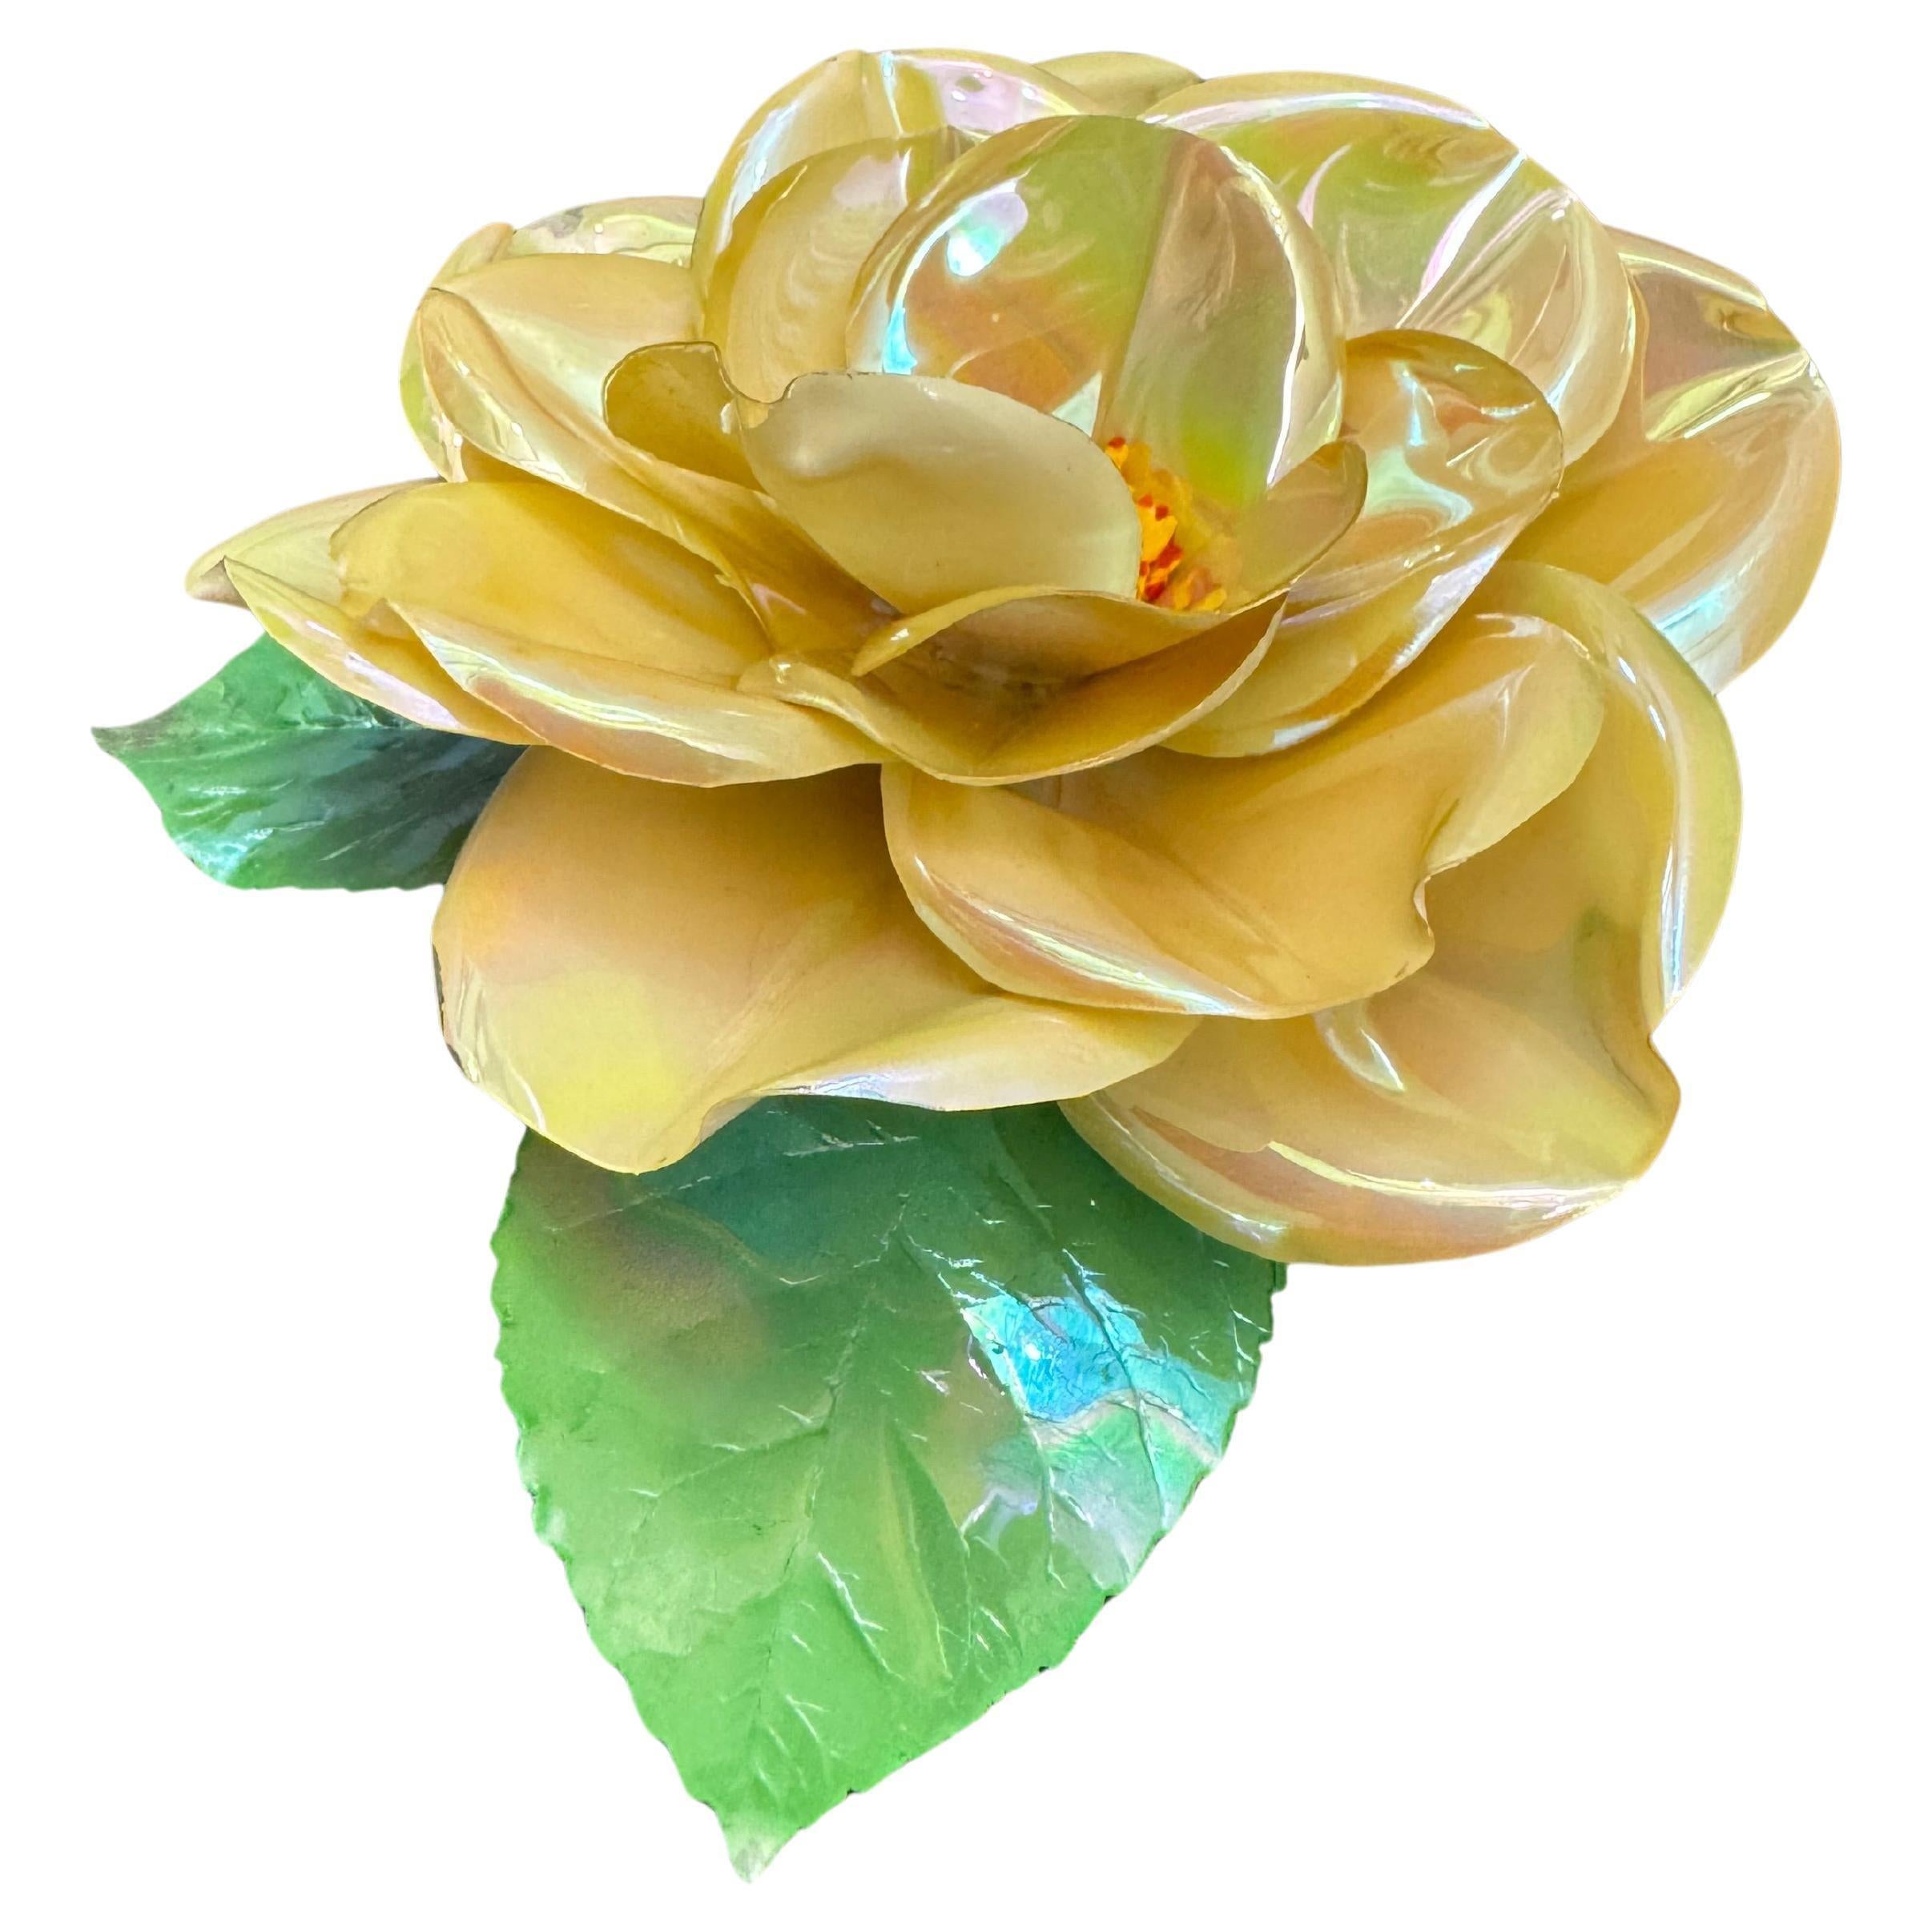 This vintage CHANEL massive camellia brooch is crafted of coated vinyl petals in iridescent pearl color. Stamped CHANEL made in France. Measures approximately 5 cm in diameter. Comes with box. 

Condition: Good vintage condition with minor peelings 